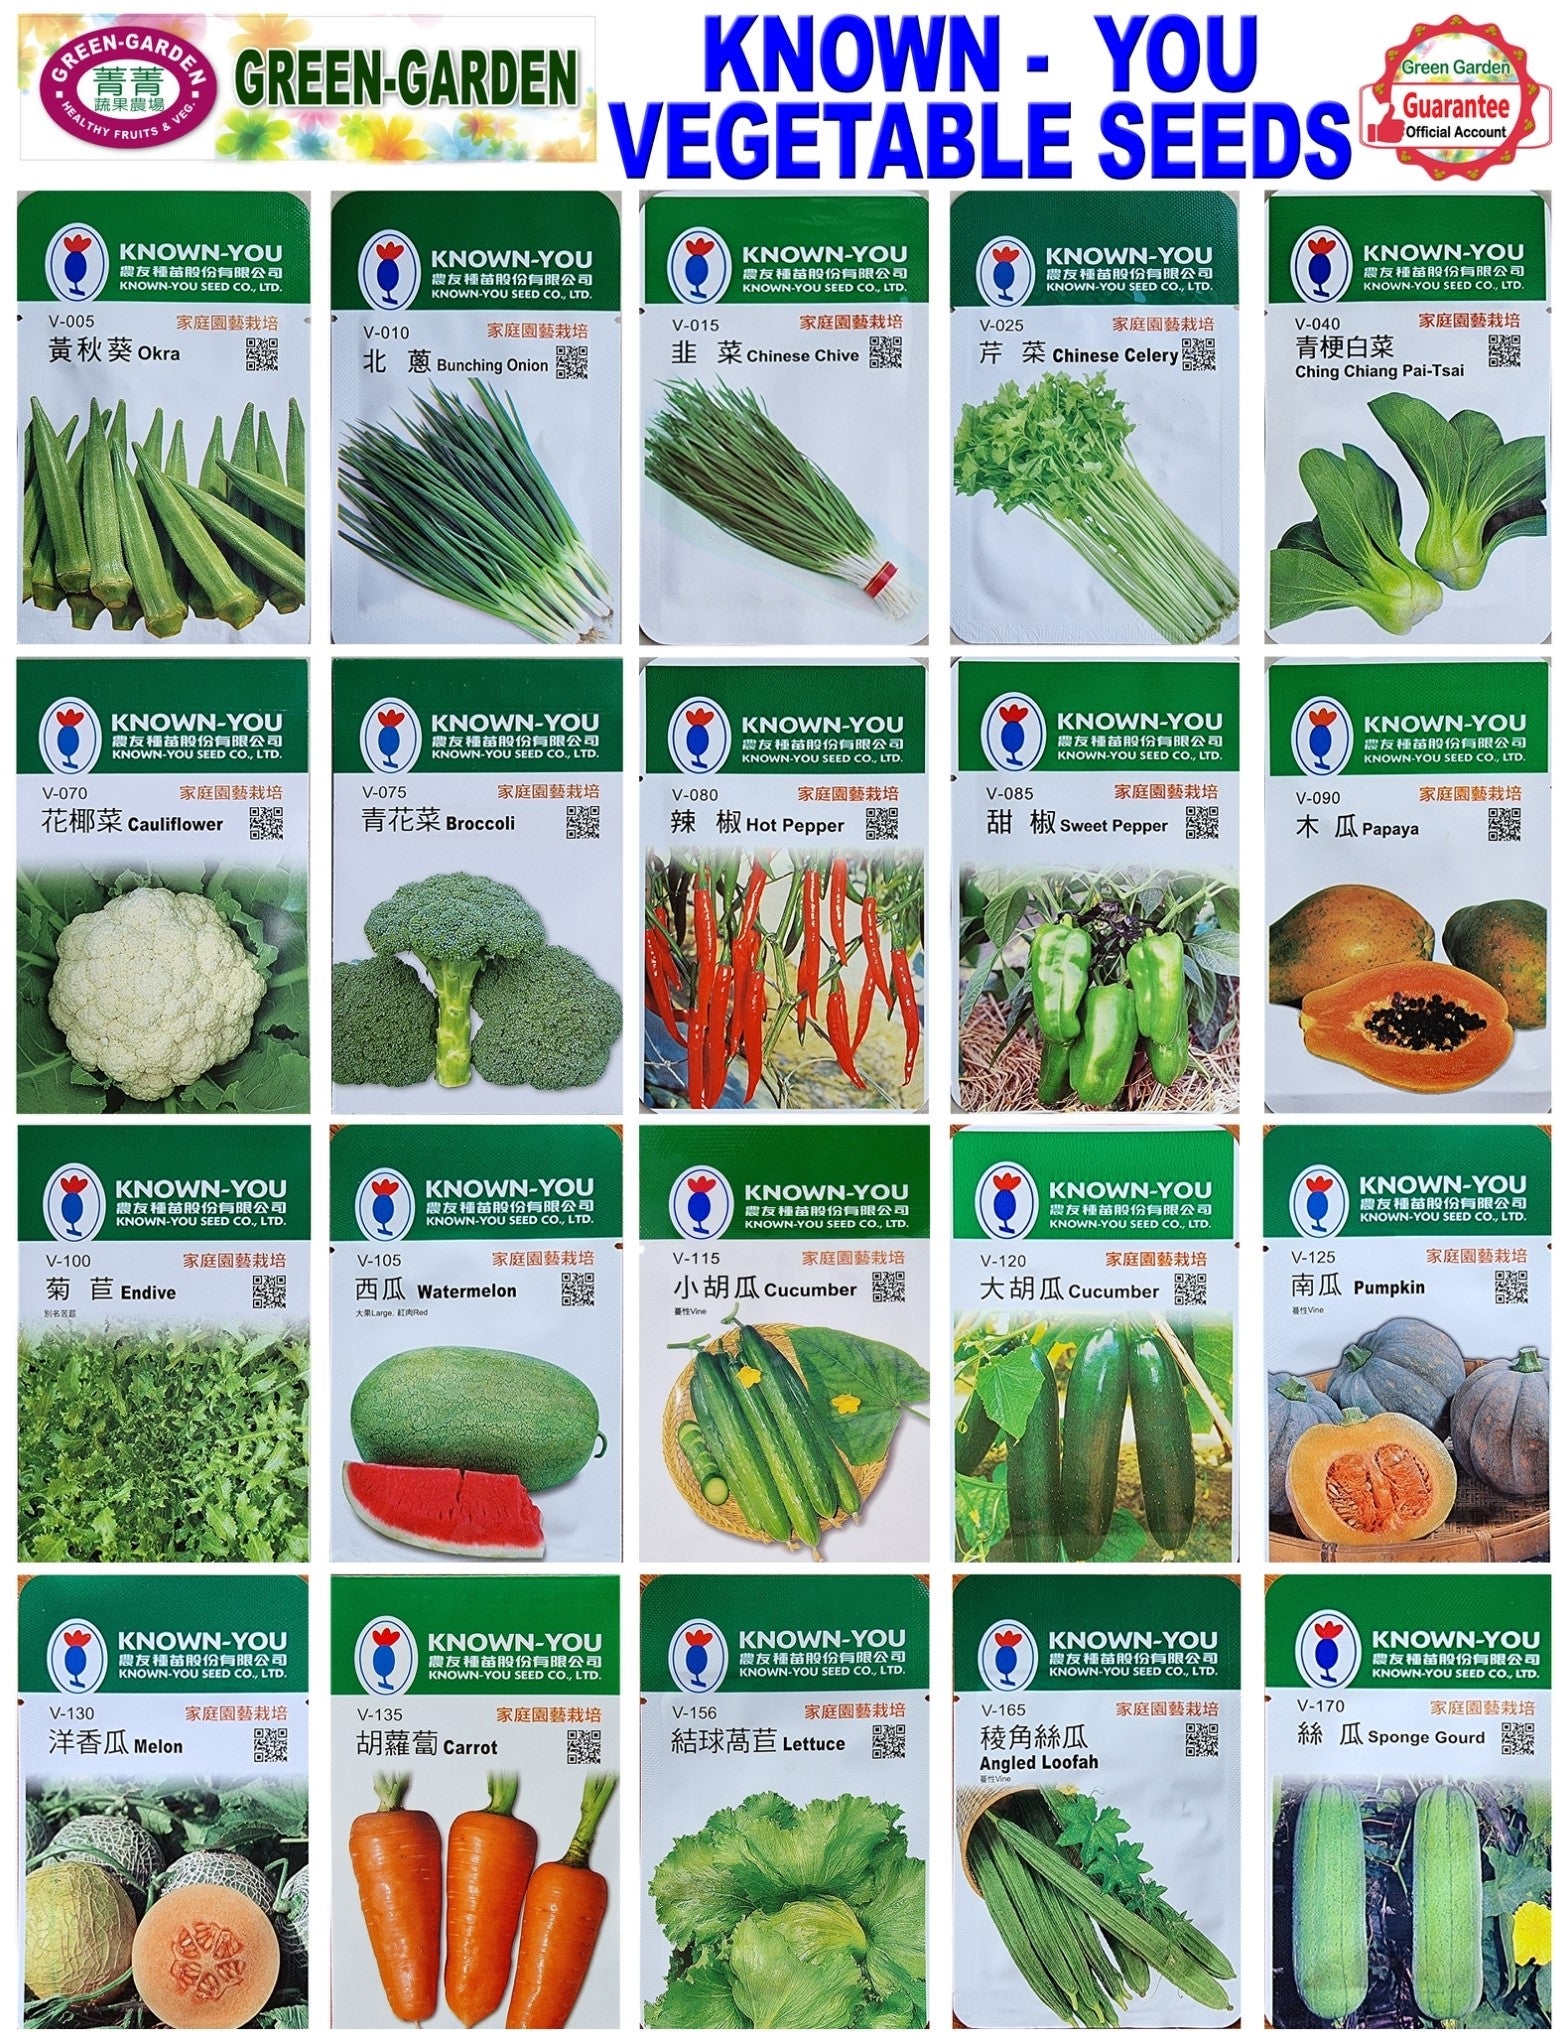 Known You Vegetable Seeds (V-216 Snap Bean)